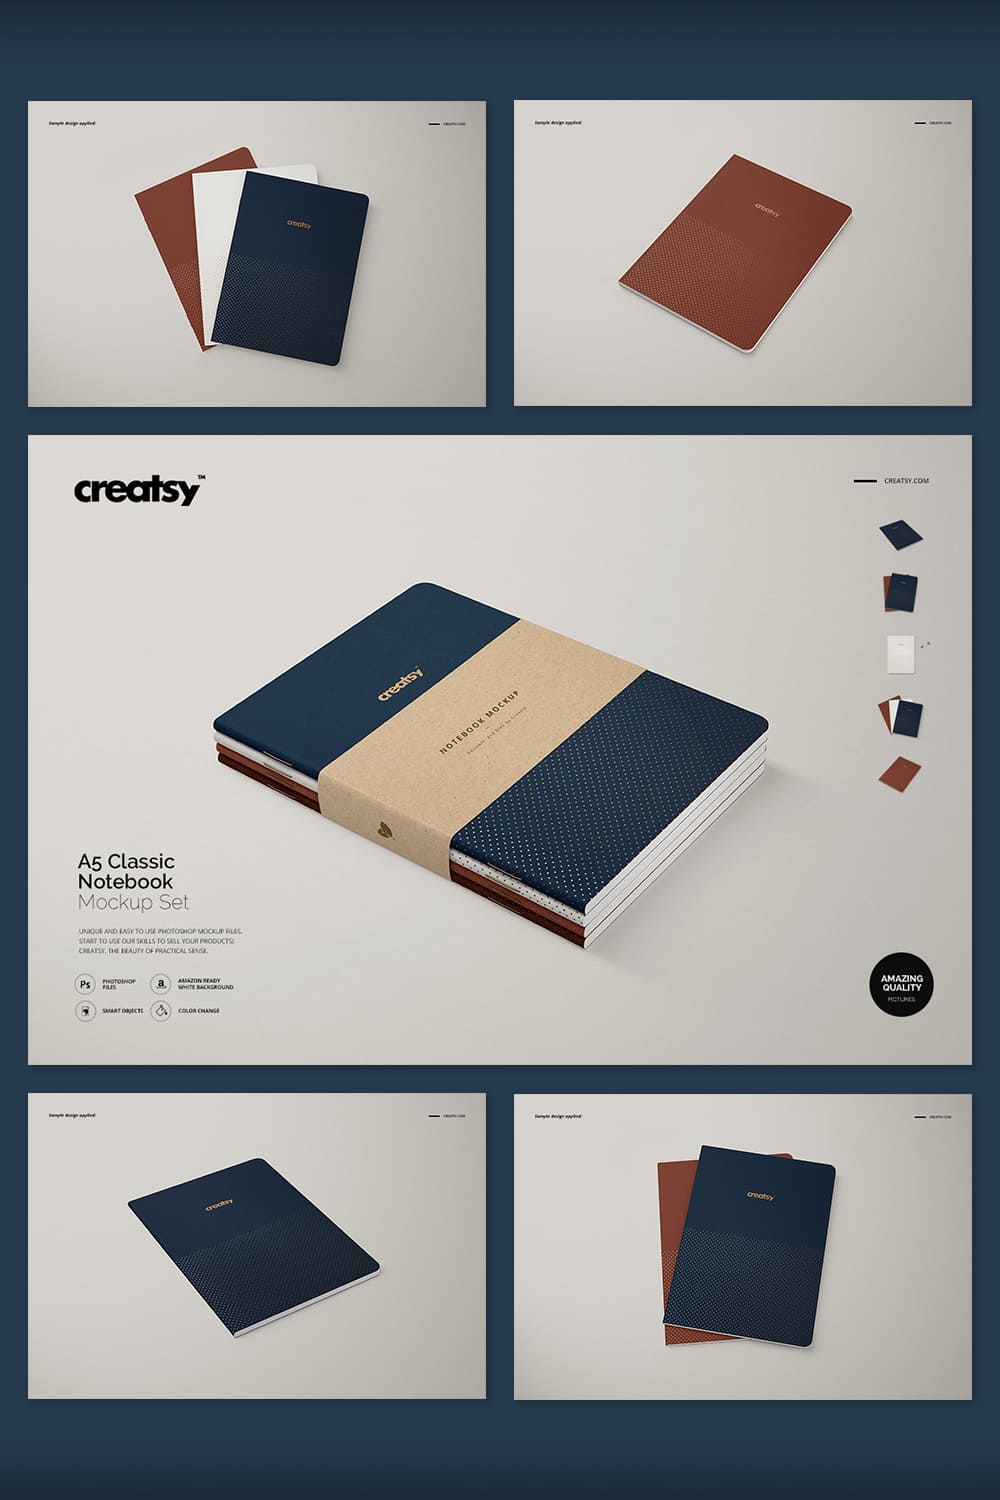 A selection of images of A5 classic notebook with a wonderful design.